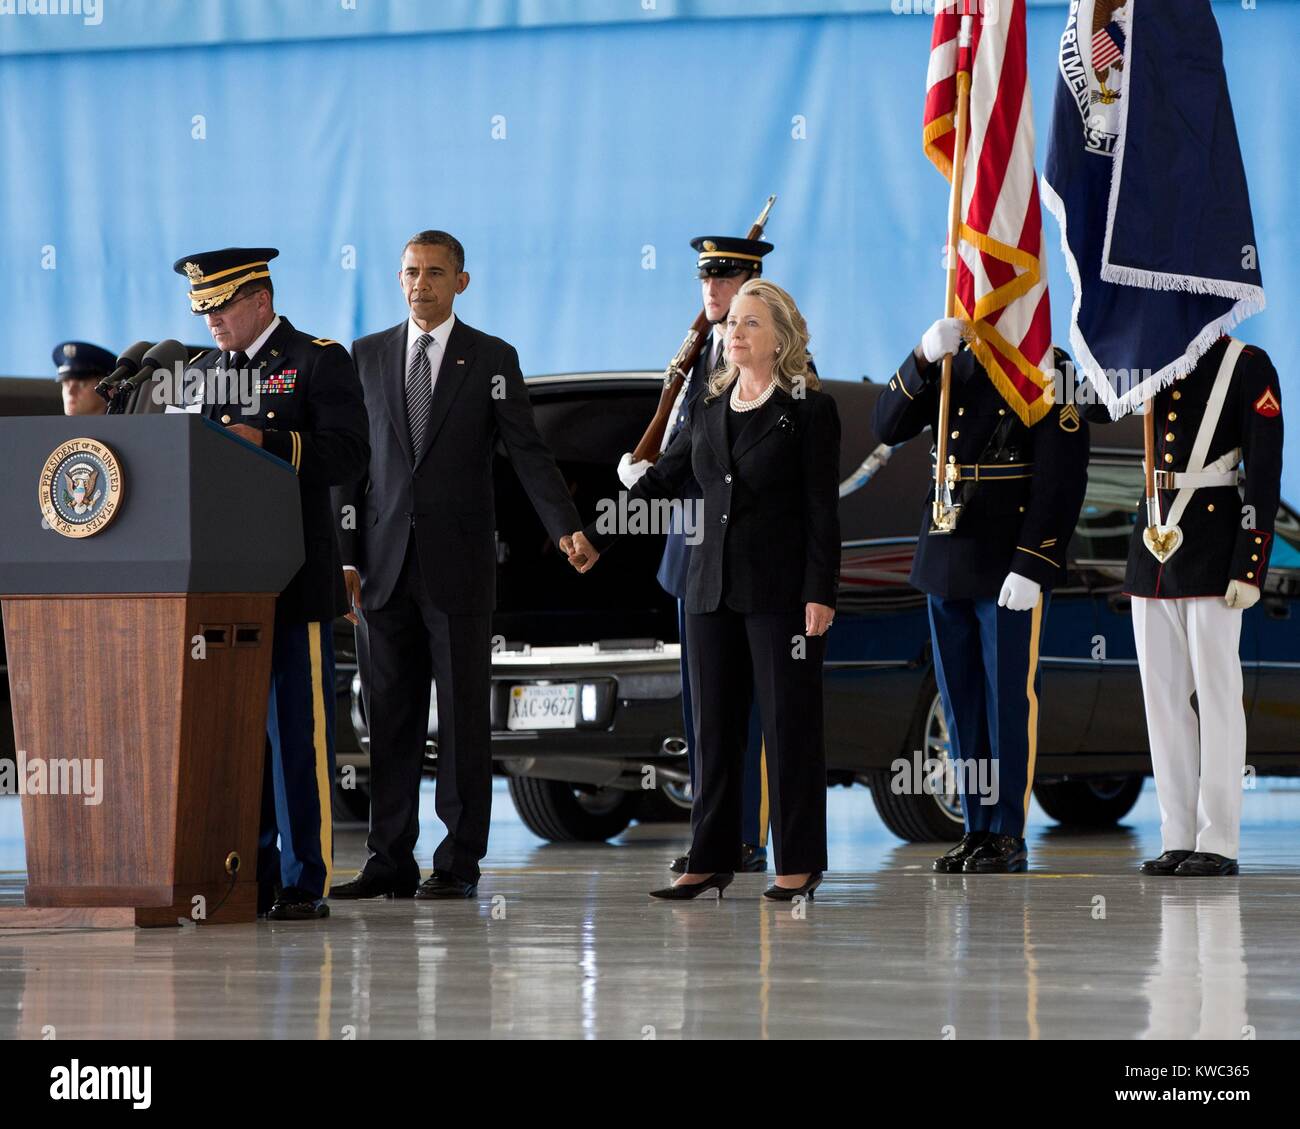 President Barack Obama holds hands with Sec. of State Hillary Rodham Clinton at Andrews Field, MD. On Sept. 14, 2012 they witnessed the transfer of remains ceremony of four Americans: J. Christopher Stevens, U.S. Ambassador to Libya; Sean Smith, Information Management Officer; and Security Personnel Glen Doherty and Tyrone Woods. All were killed in the attack on the U.S. Consulate in Benghazi, Libya. (BSLOC 2015 13 231) Stock Photo